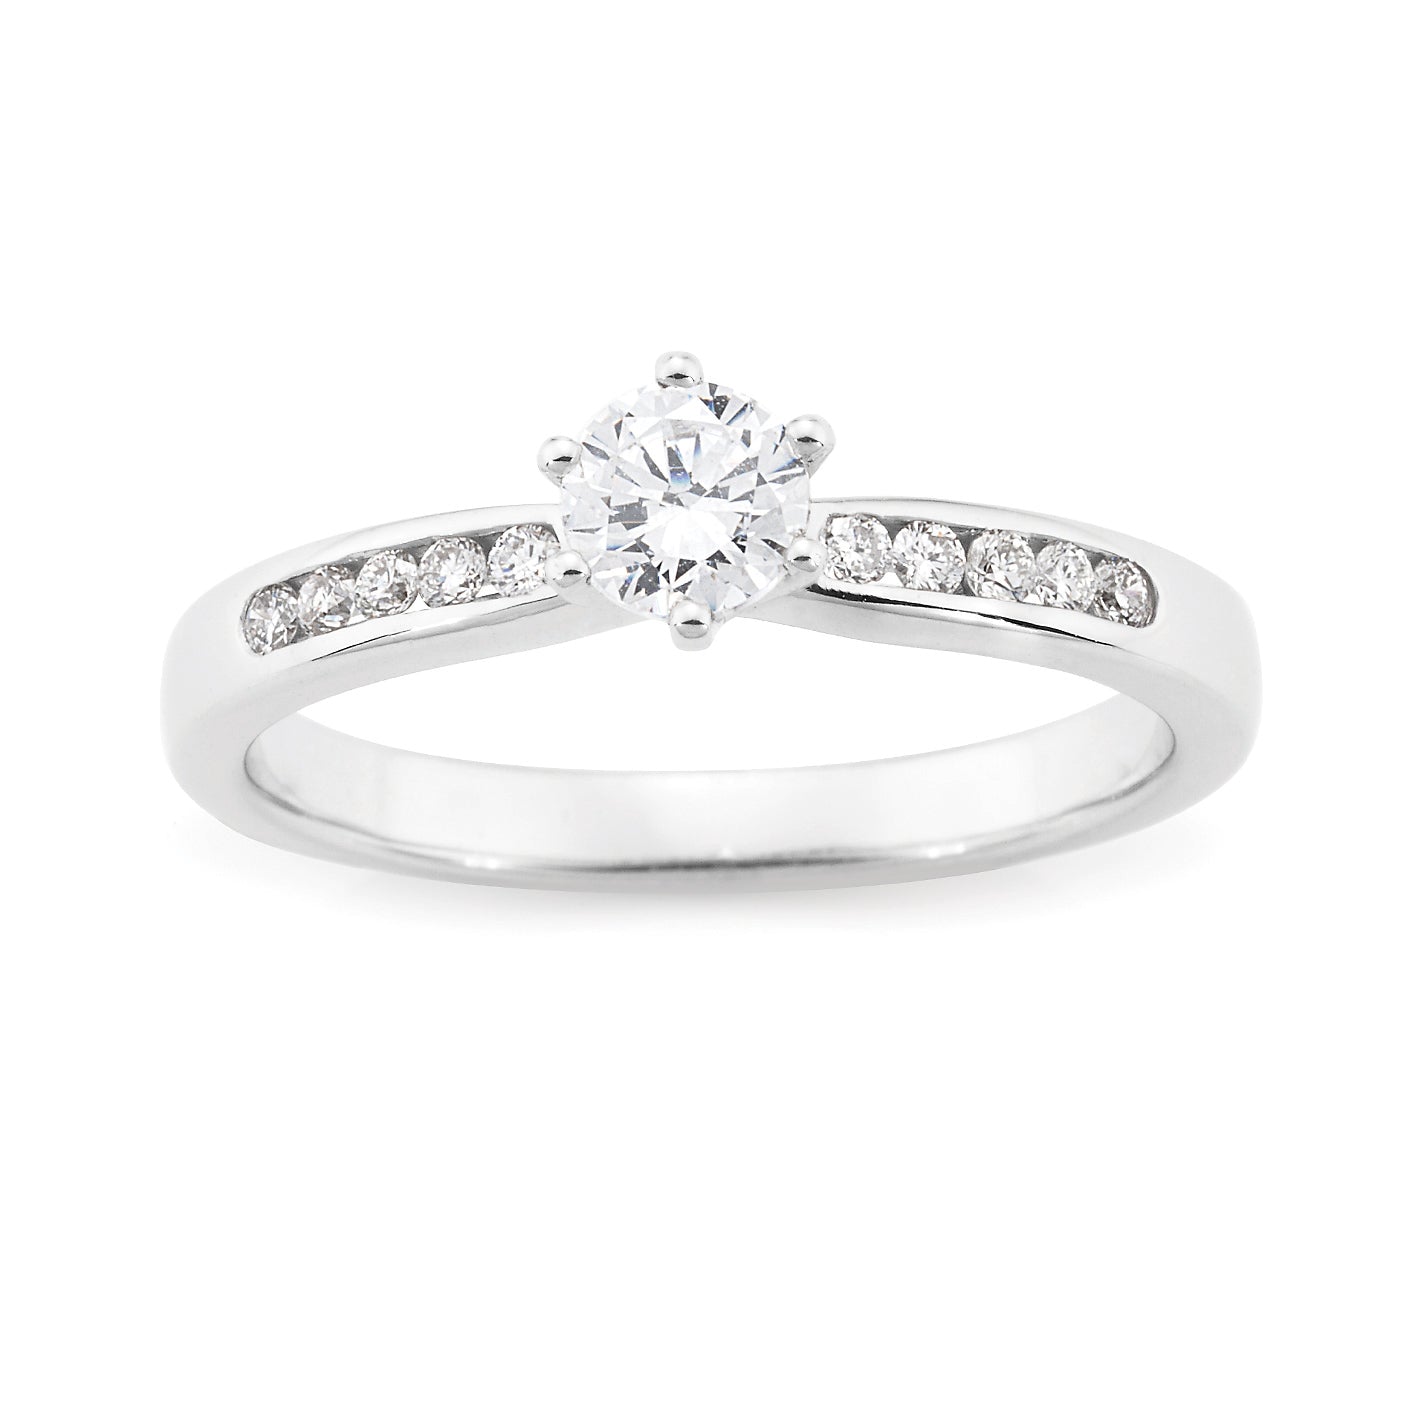 Diamond Set 6 Claw Engagement Ring in 18ct White Gold